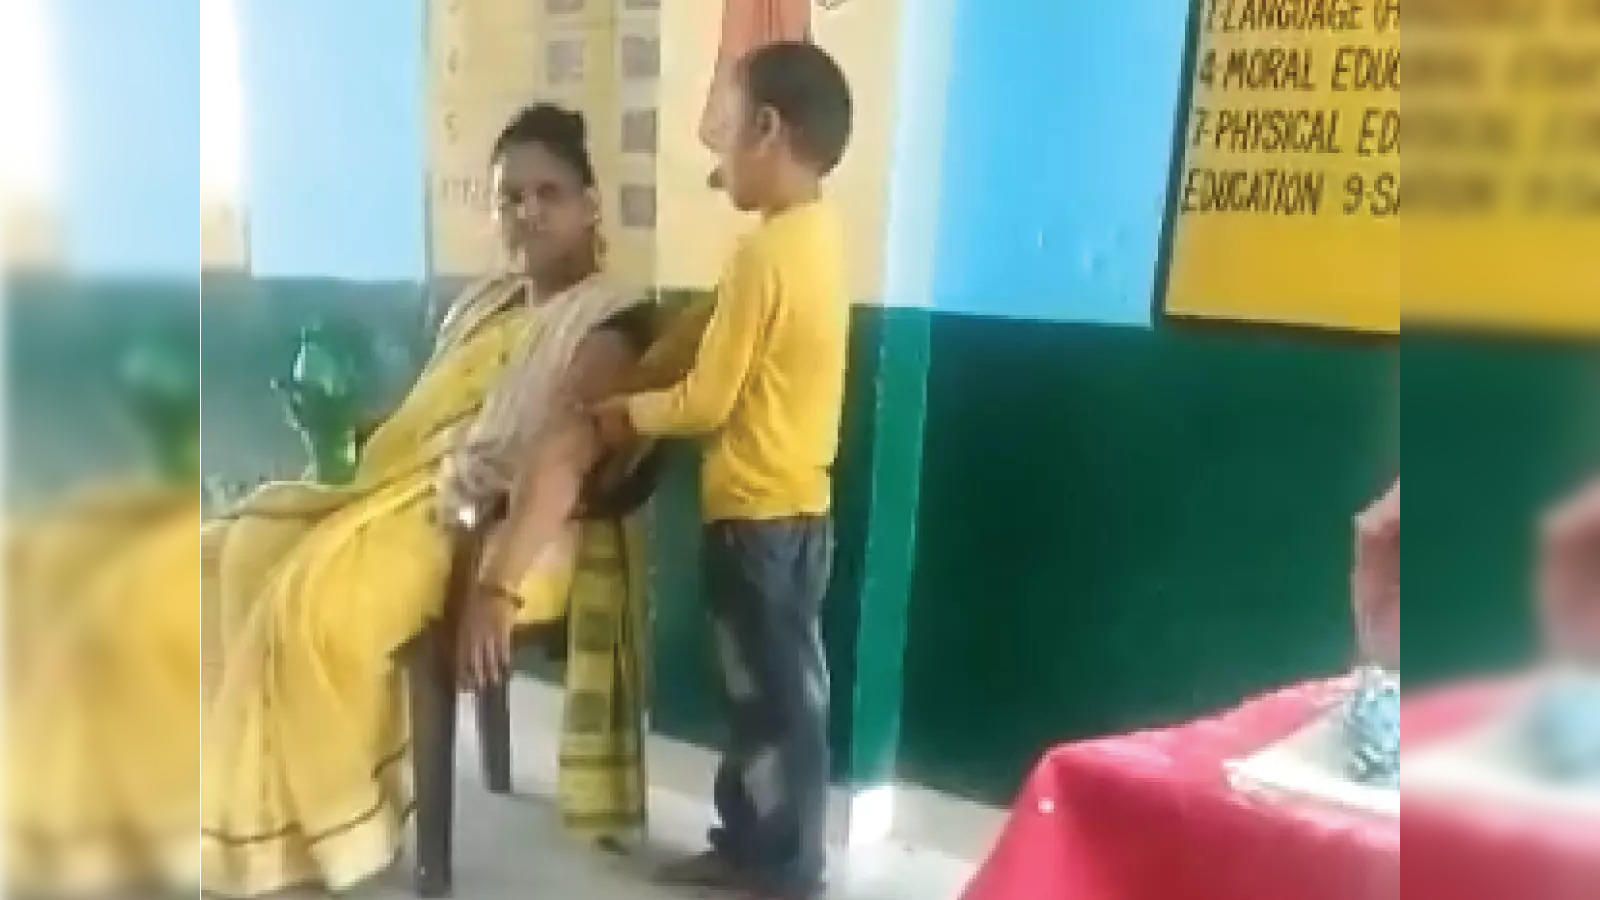 Tea And Student Sex Videos - Teacher Massage: Teacher gets student to massage her arm, is suspended:  Viral video - The Economic Times